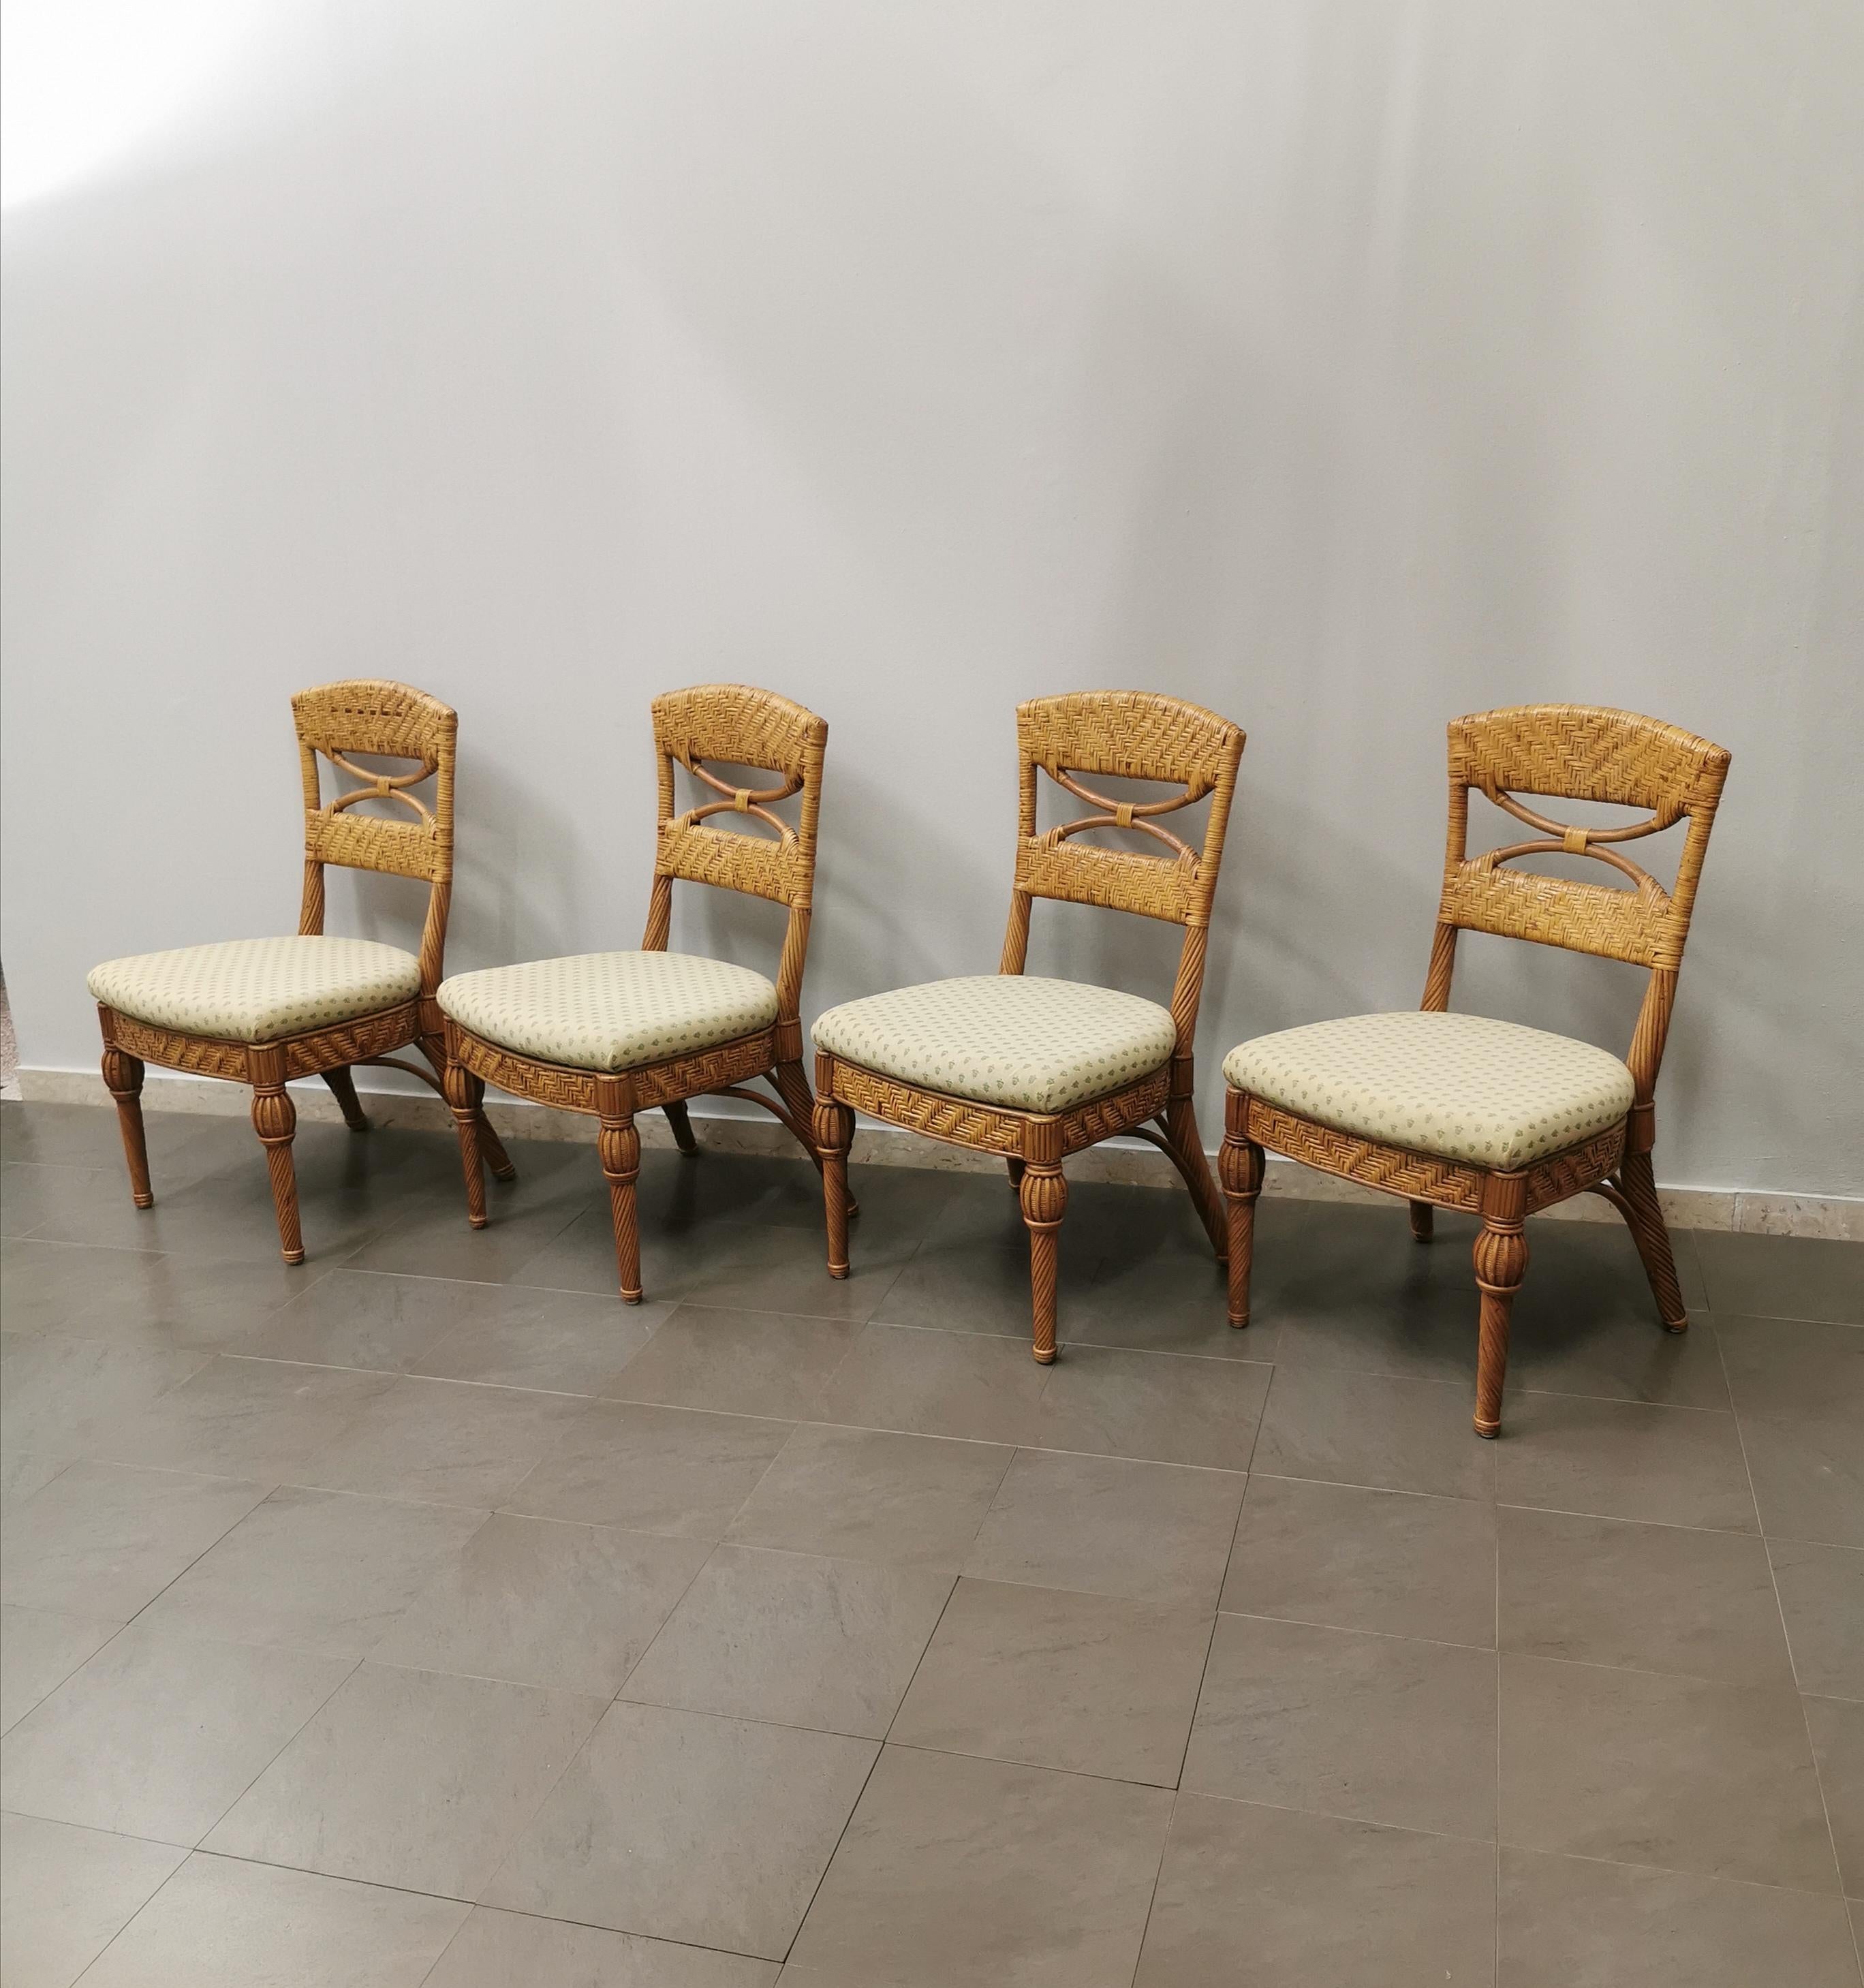 Dining Room Chairs Wicker Fabric Vivai del Sud Midcentury Italy 1980s Set of 4 For Sale 2